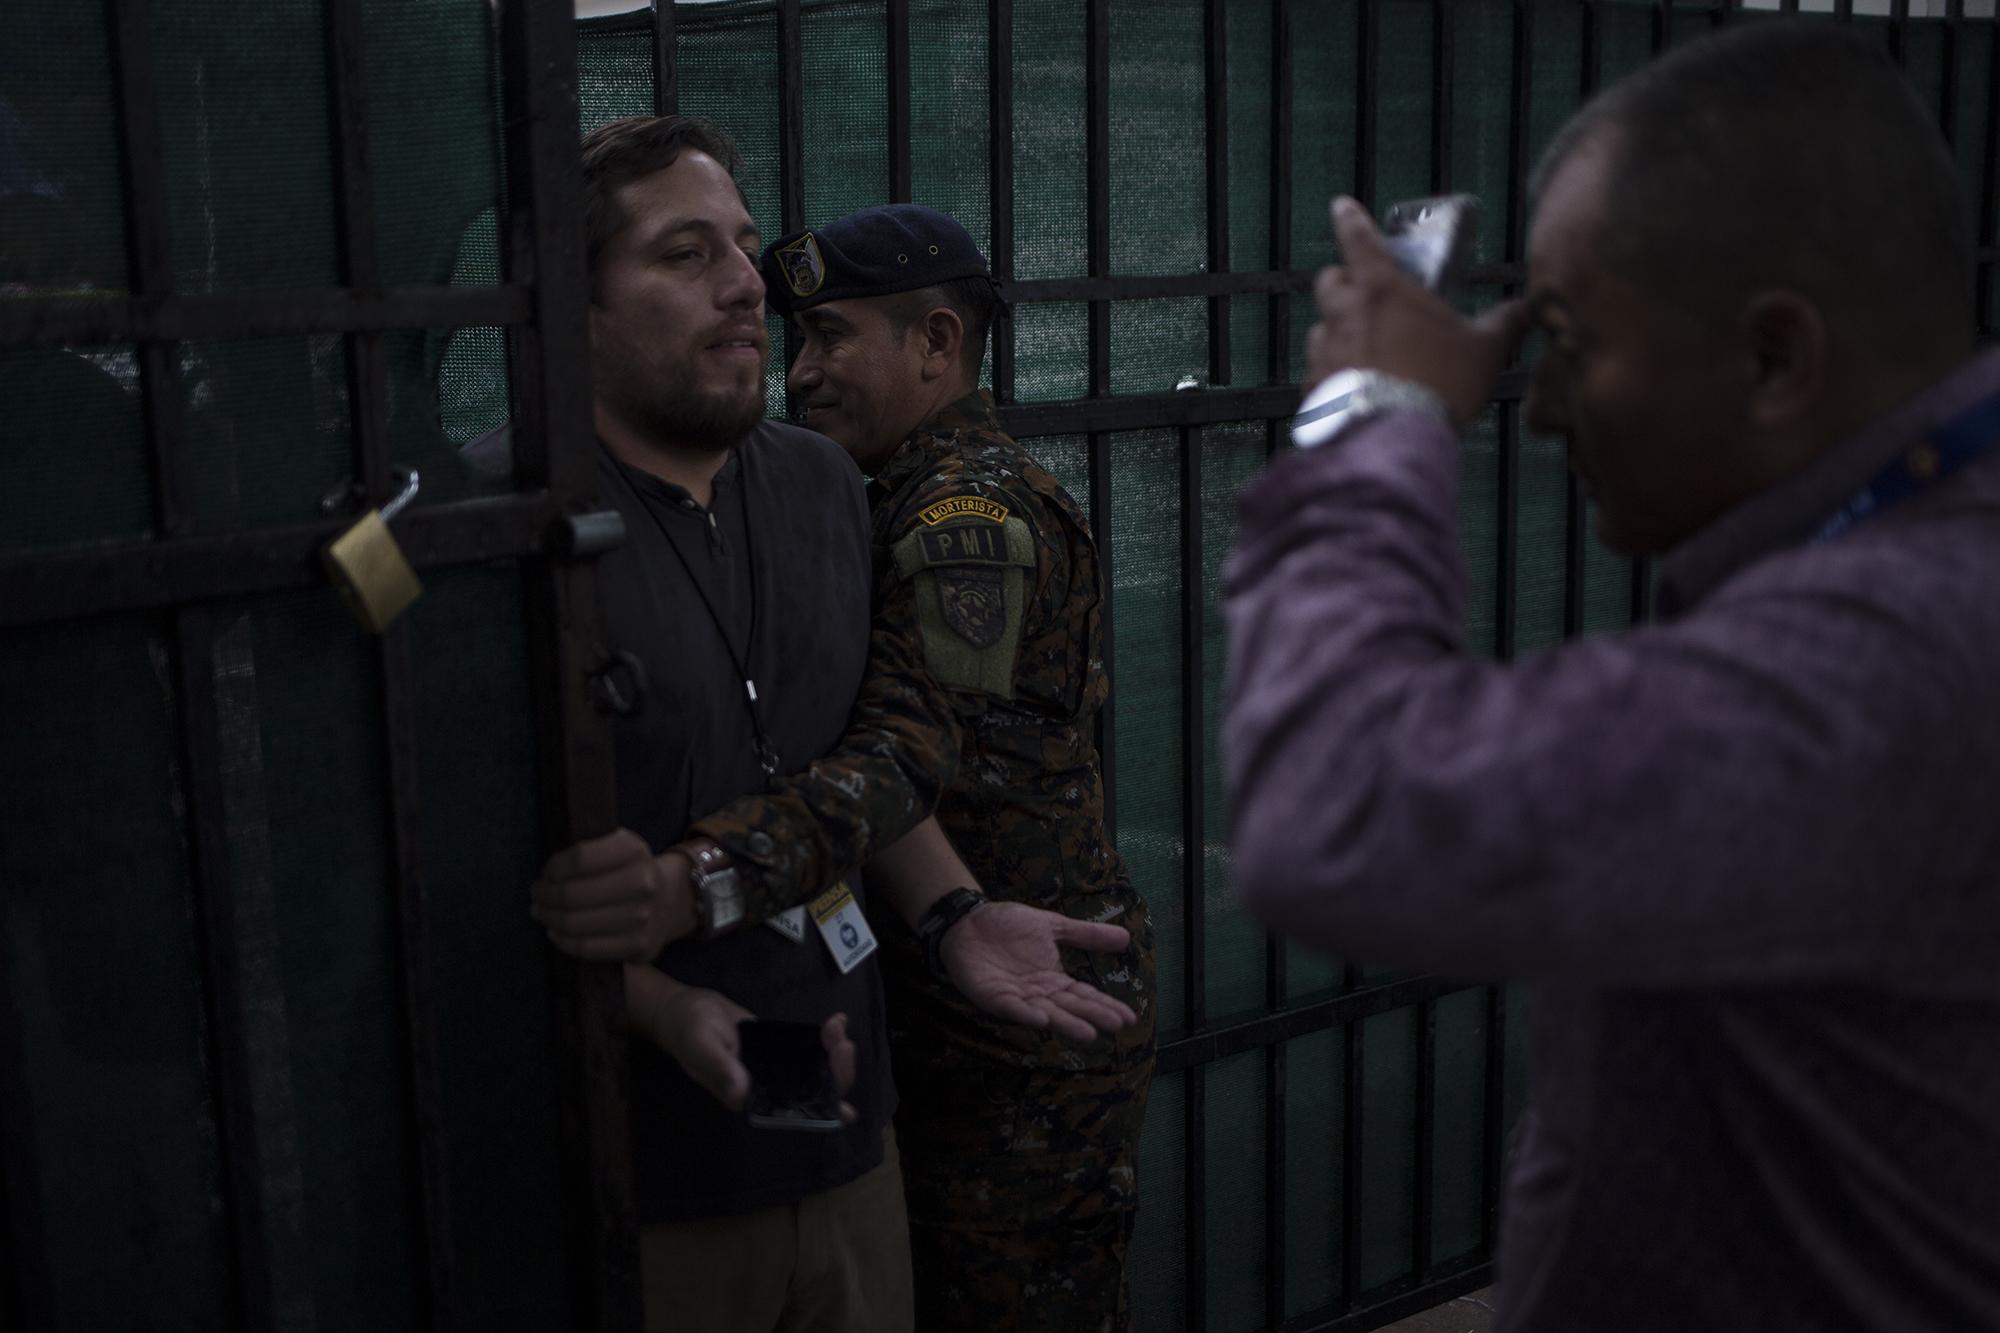 El Faro's Gabriel Labrador, left, detained by the Presidential General Staff at Casa Presidencial on September 6, 2019. Officers denied access to a press conference to two journalists from El Faro and one from Revista Factum after the president, bothered by off-mic follow-up questions, argued that they should learn how to 